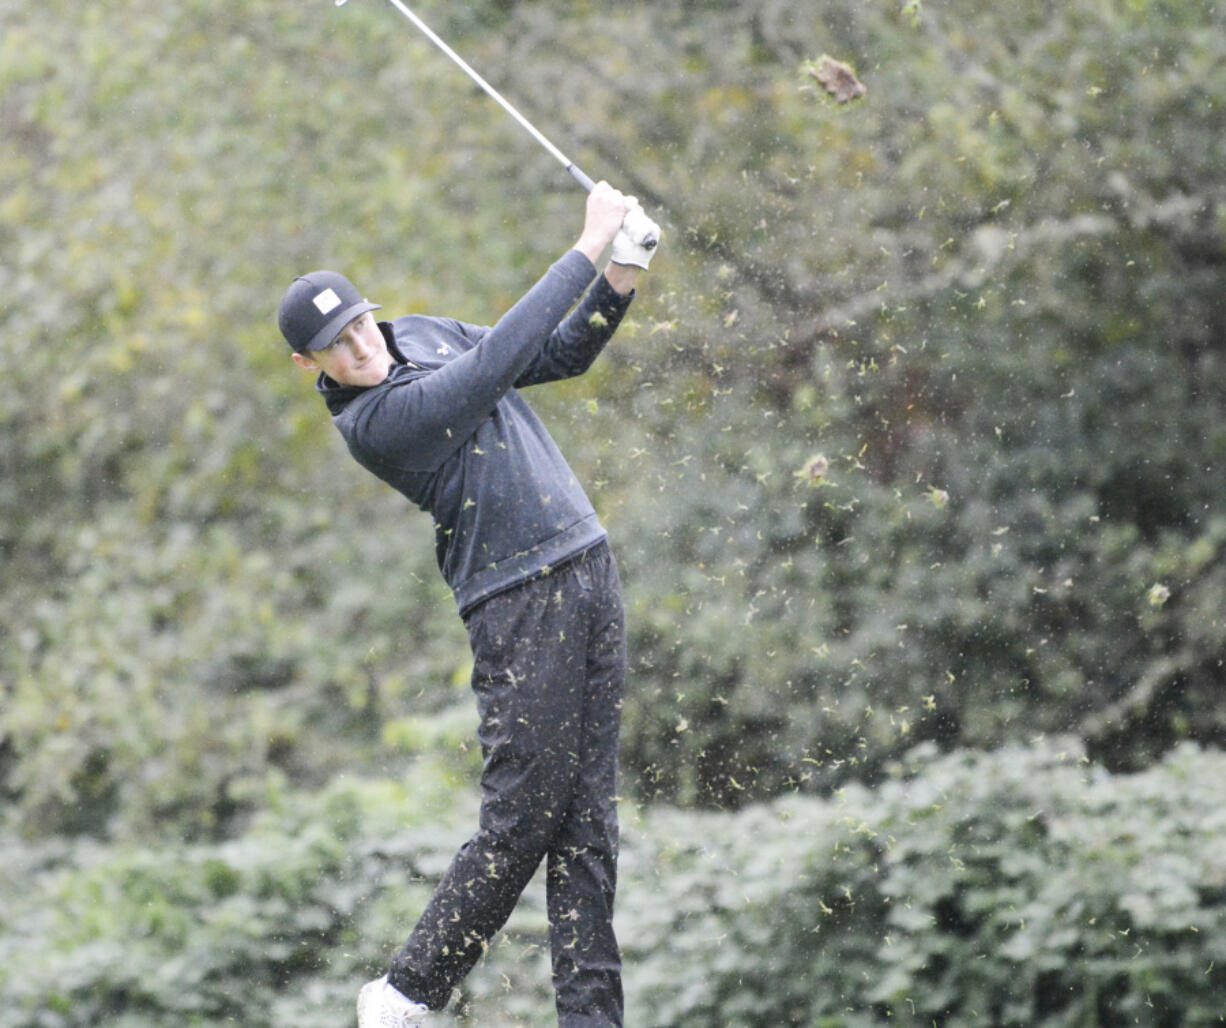 Woodland&Igrave;s Dane Huddleston hits a shot on the No. 17 hole at Orchard Hills Golf Club in Washougal at the Class 2A District 4 golf tournament on Tuesday, Oct.